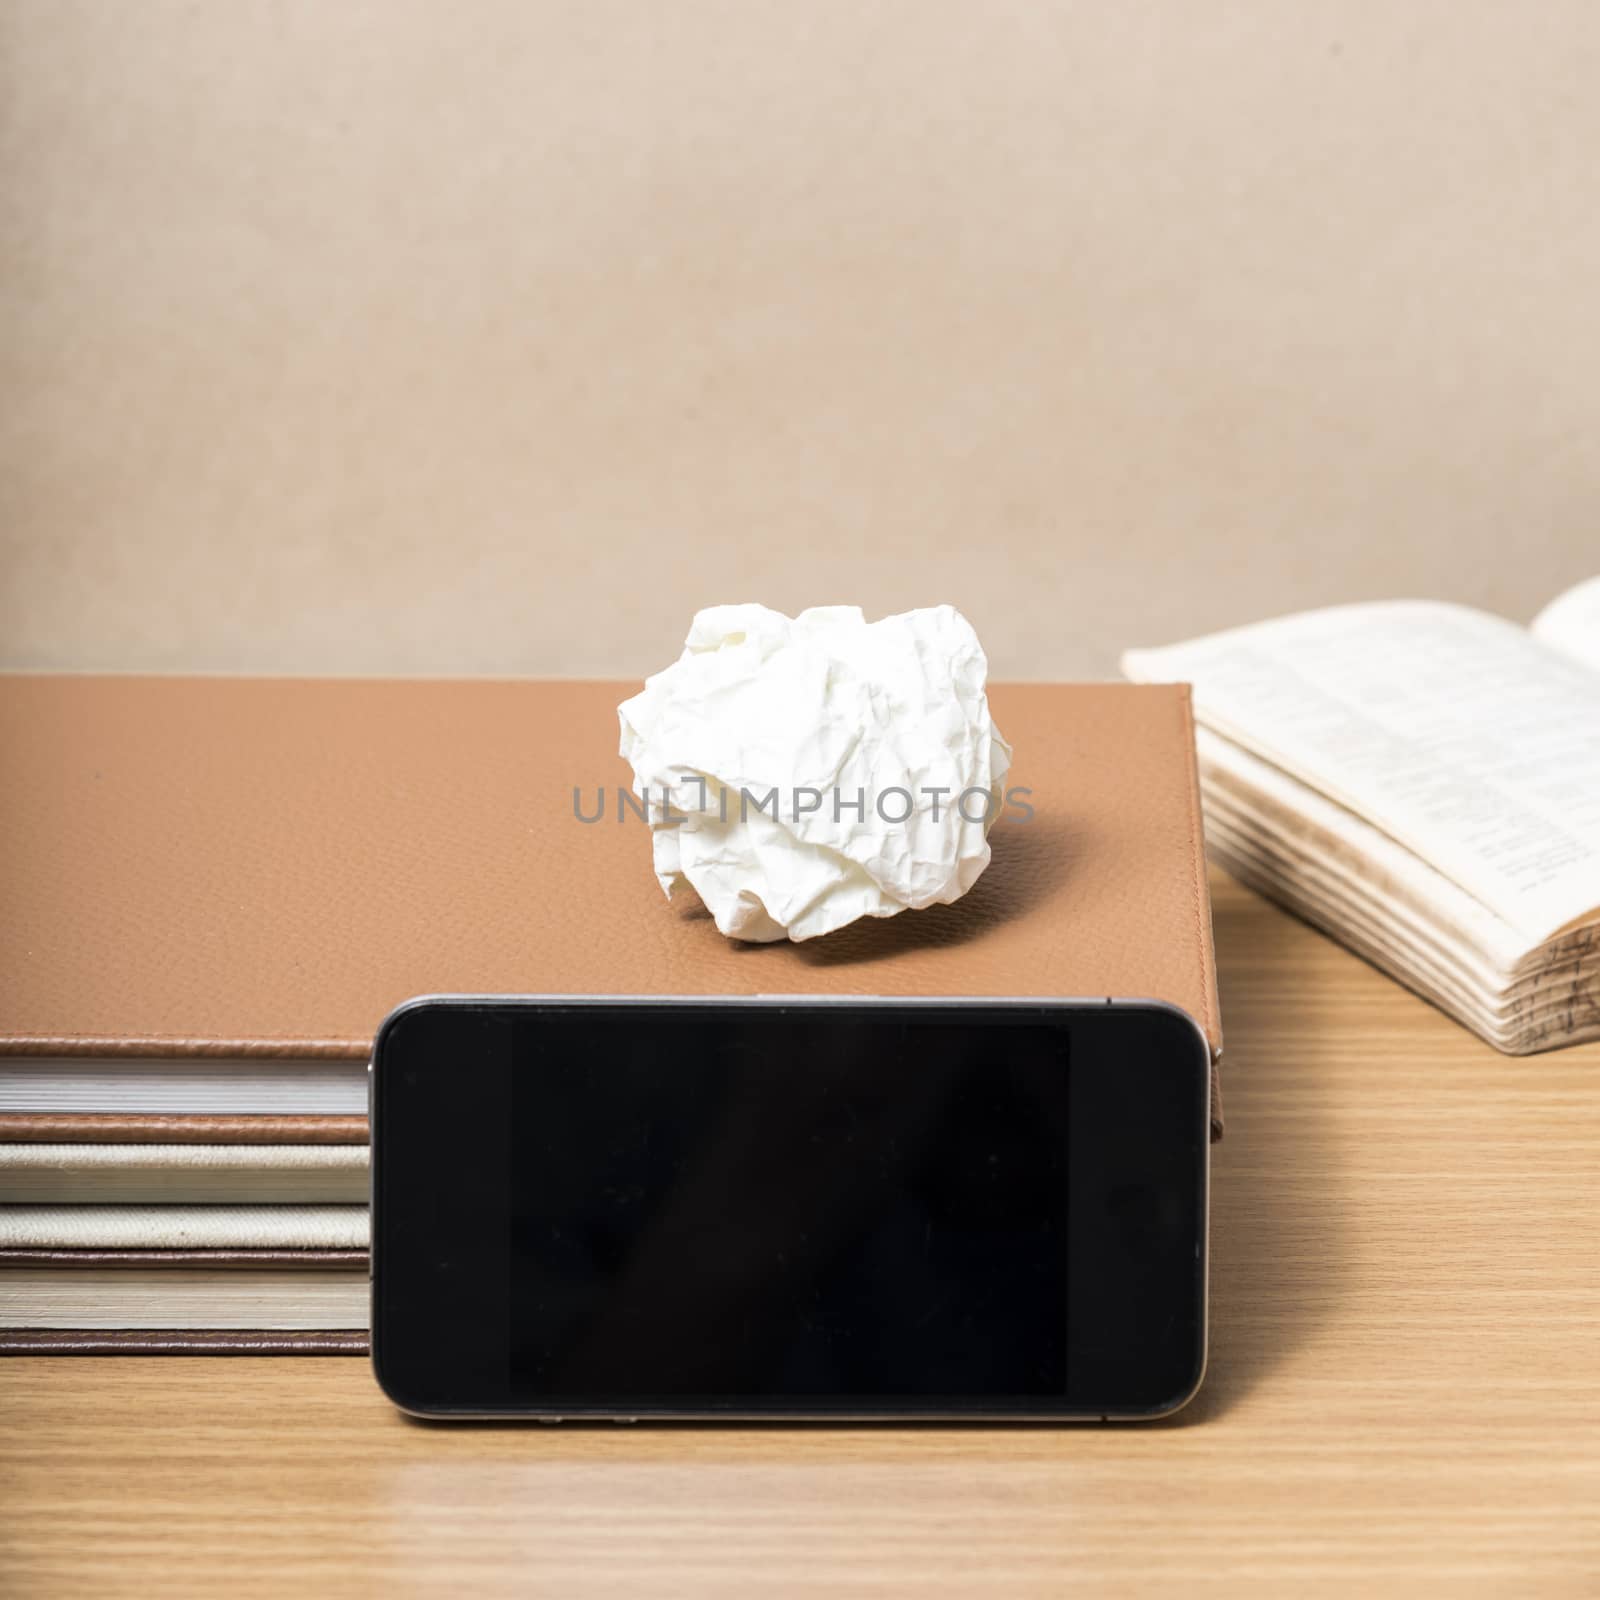 stack of book with smart phone on wood background